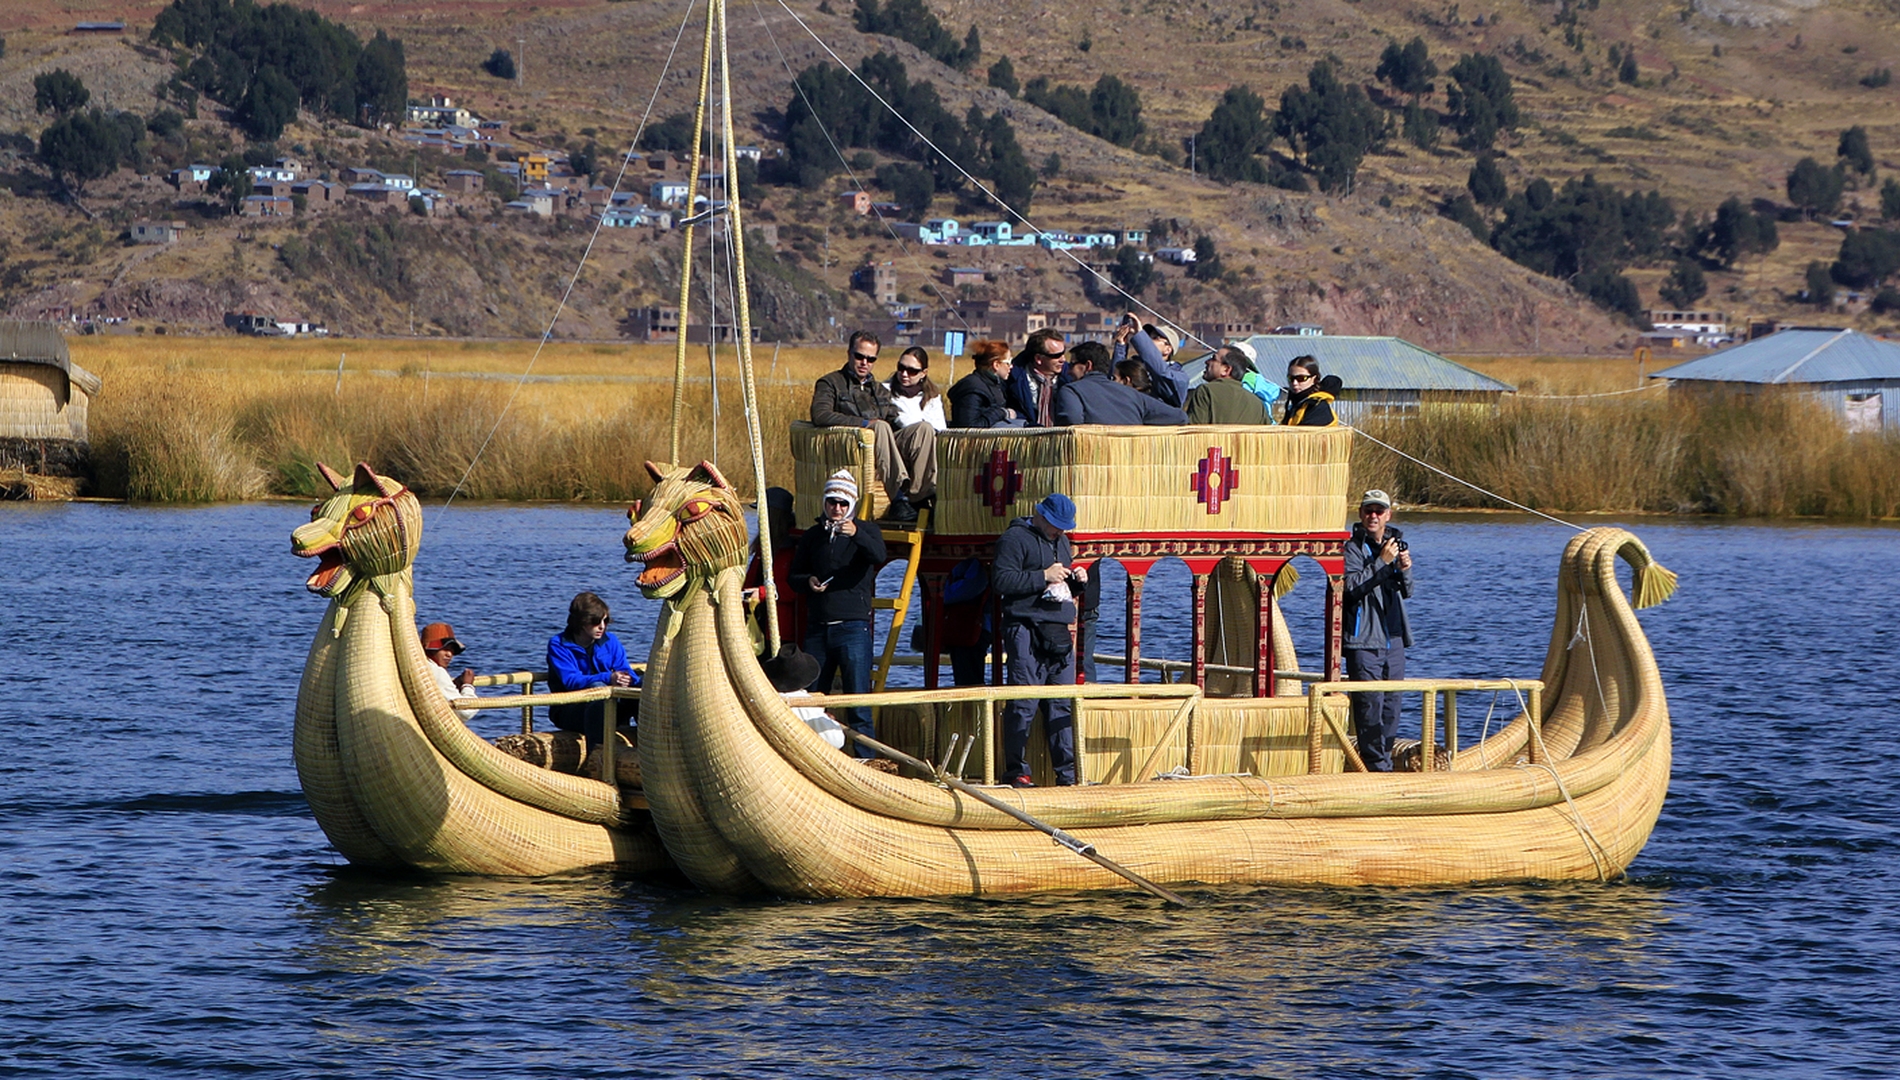 Riding the Waves on a Totora Reed Boat in Lake Titicaca